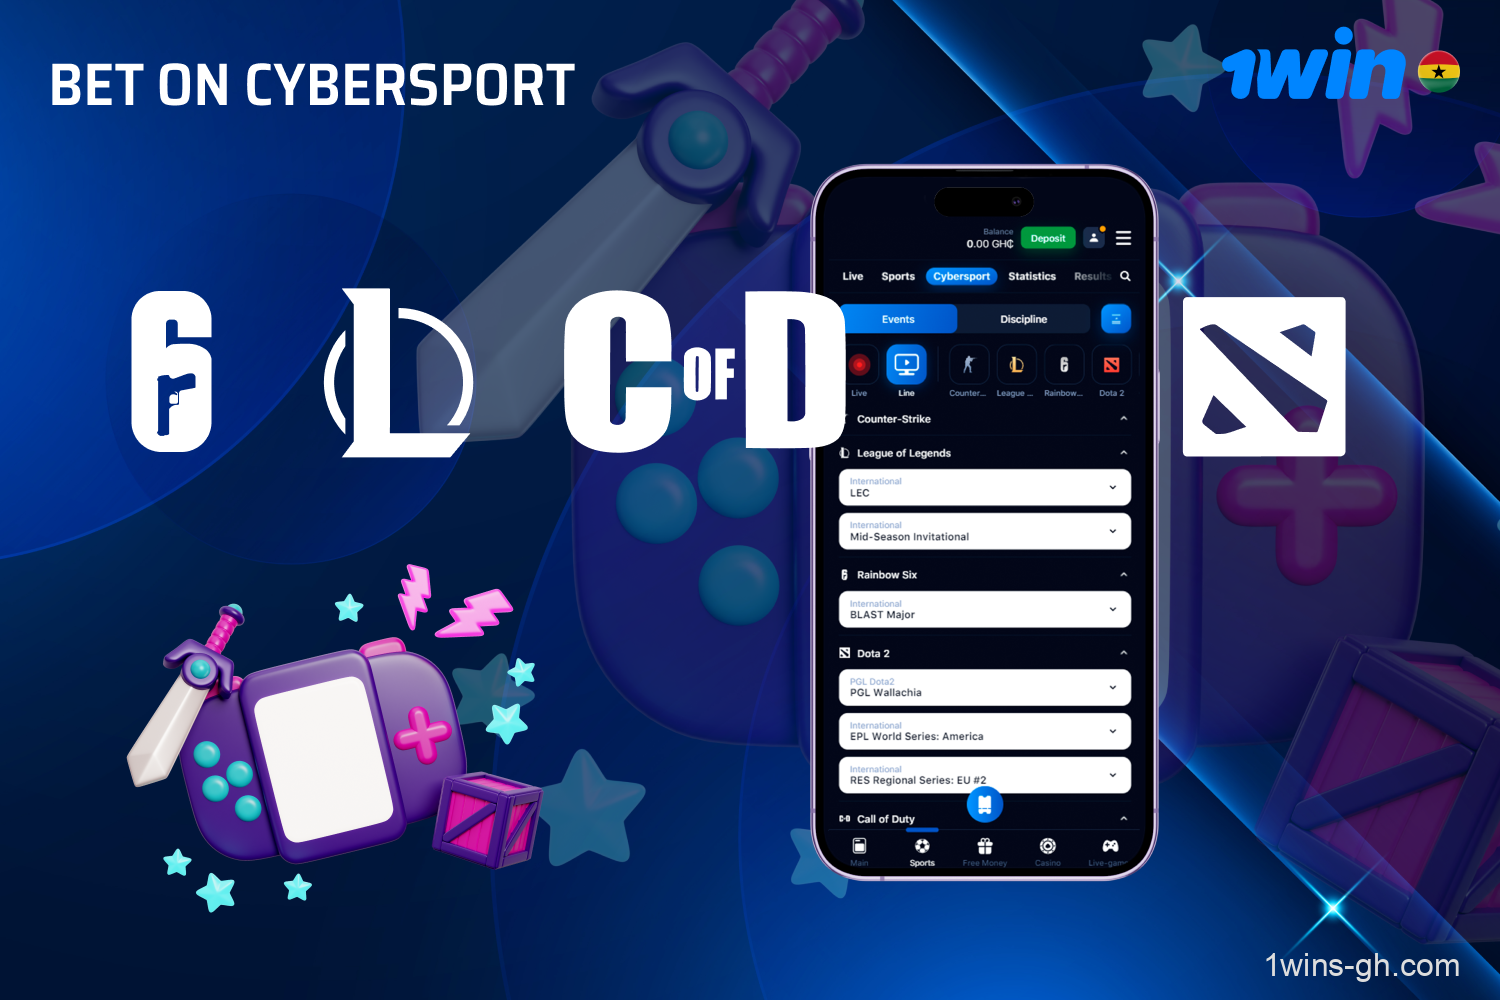 Cybersport betting is popular among 1win players from Ghana